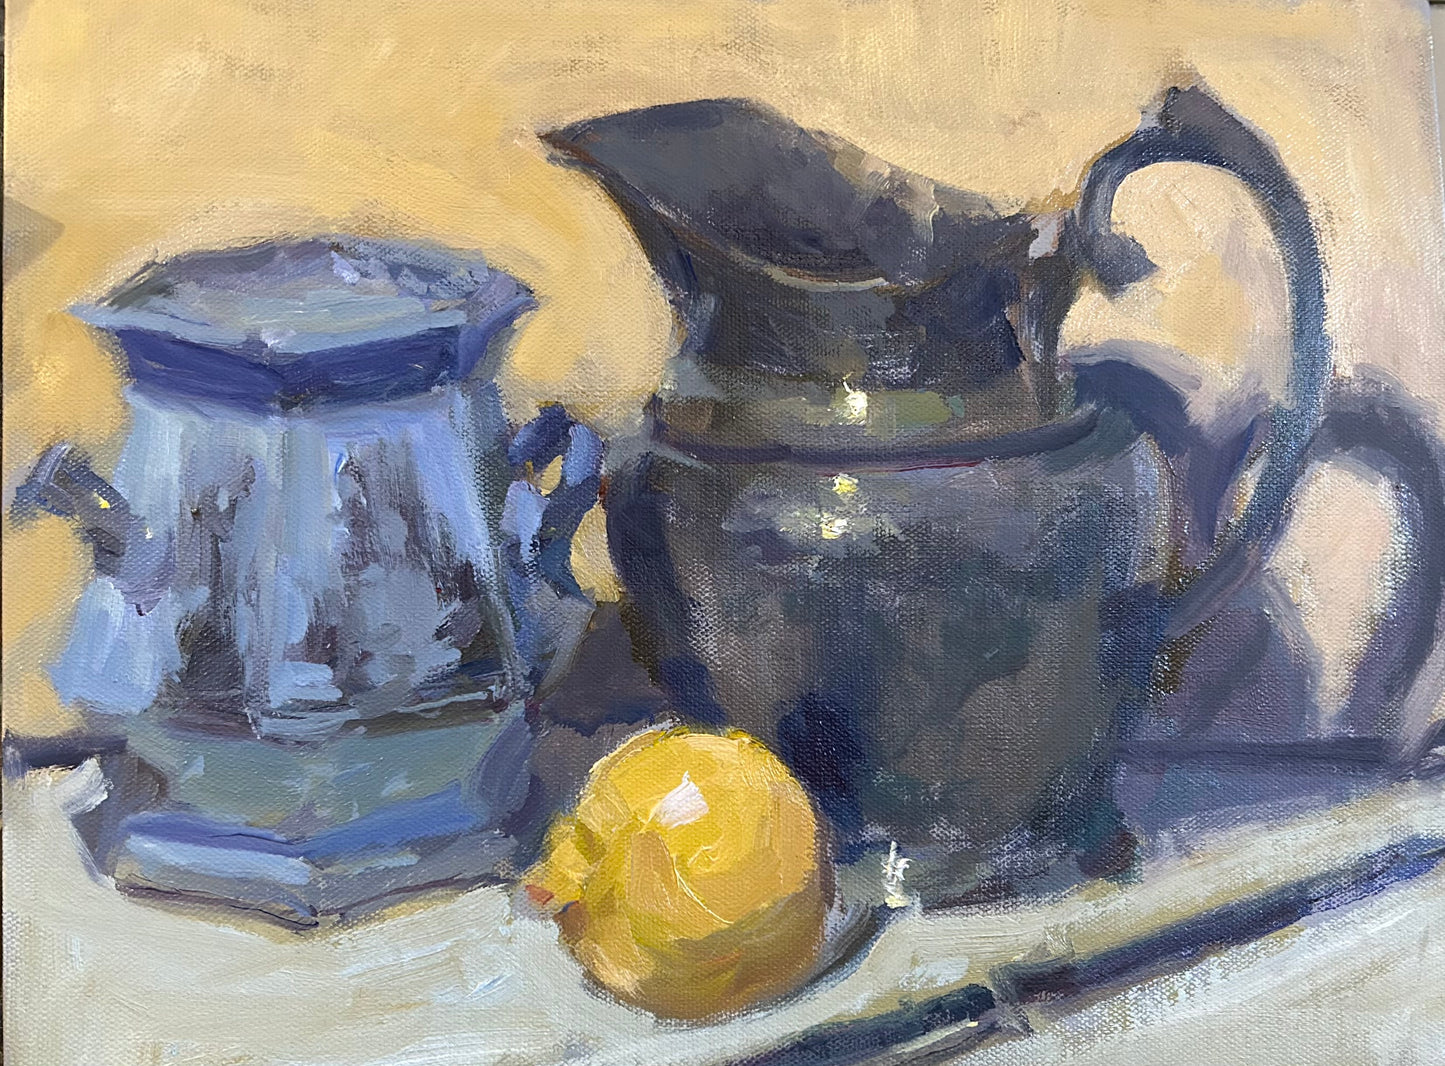 Lemon and Tarnished Pitcher (11 x 14 Inches)